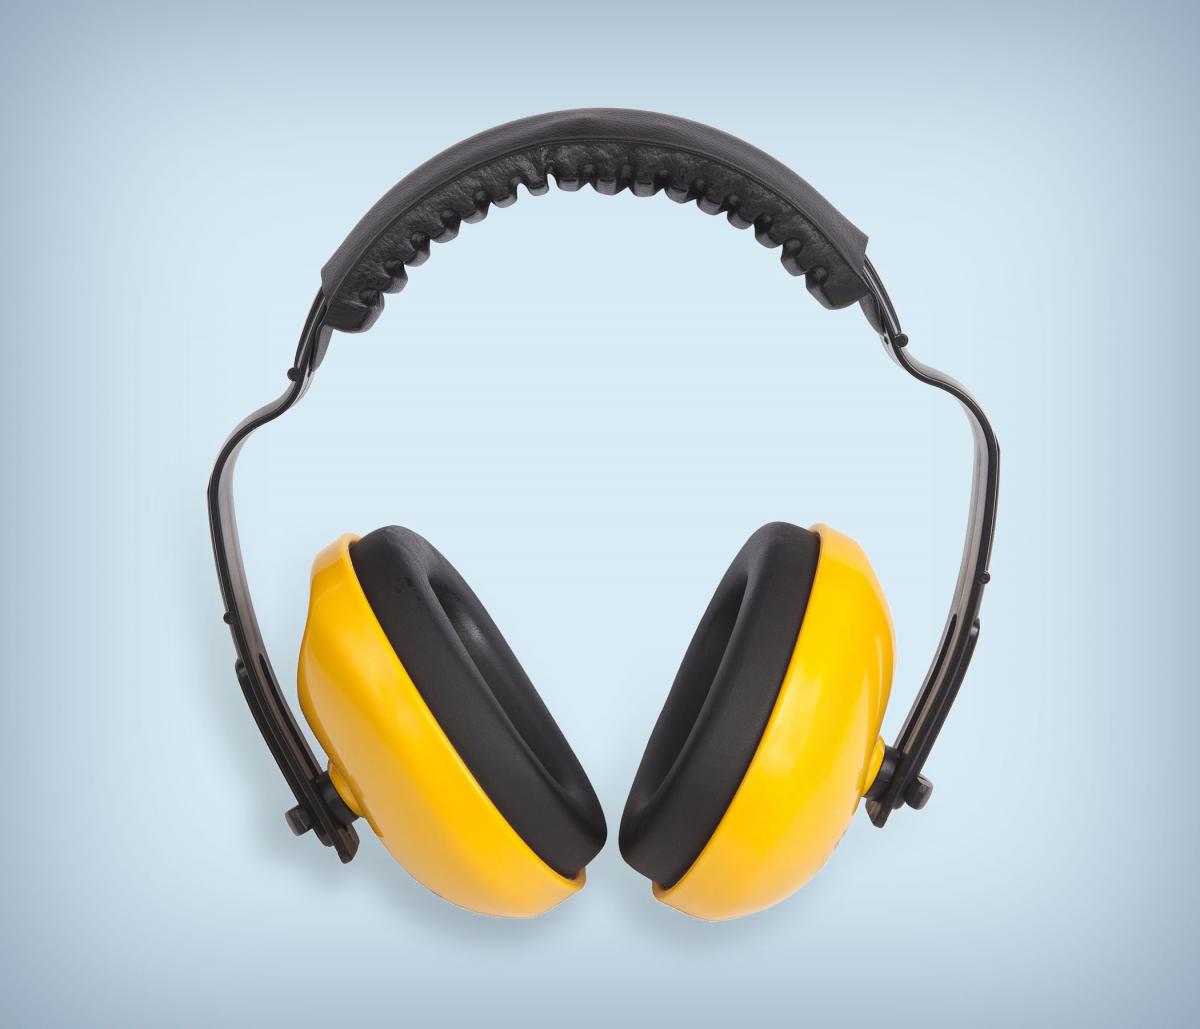 Yellow and black earmuffs used to protect hearing.